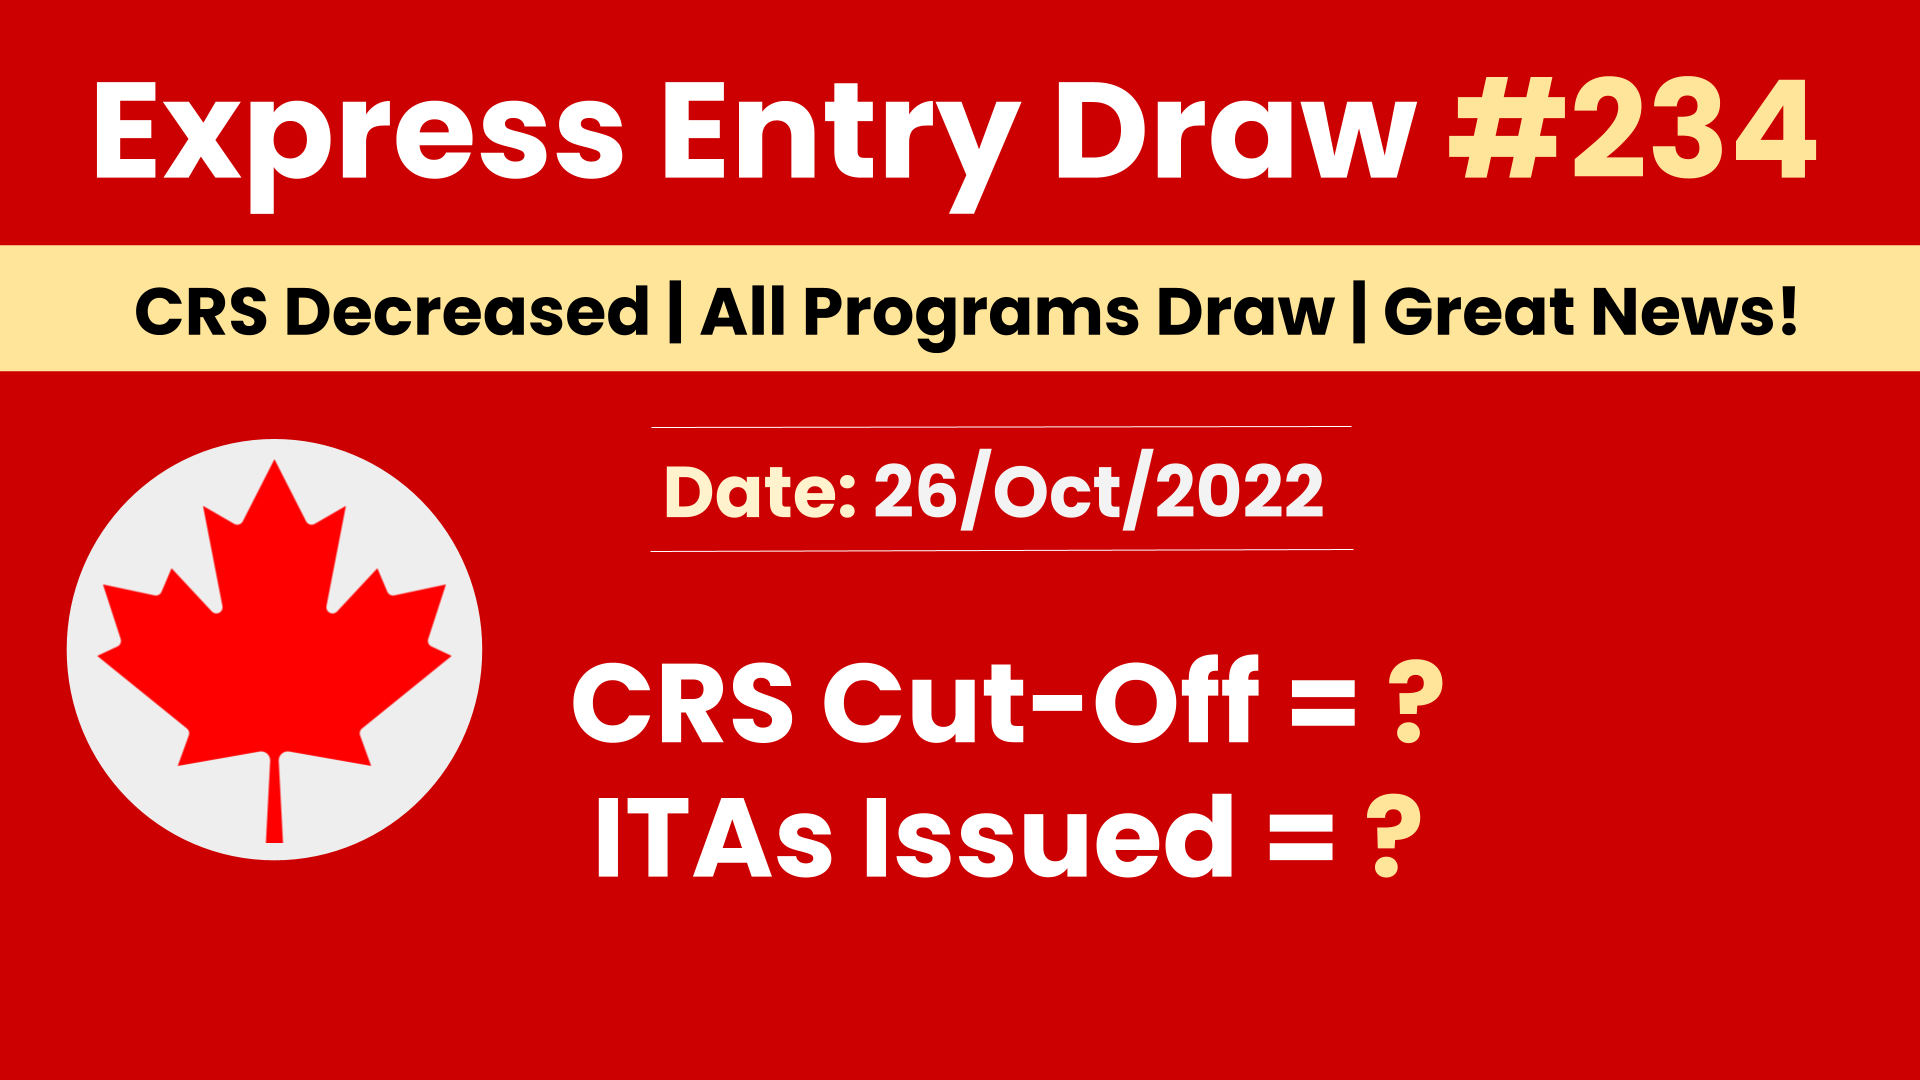 Canada Latest Express Entry Draw